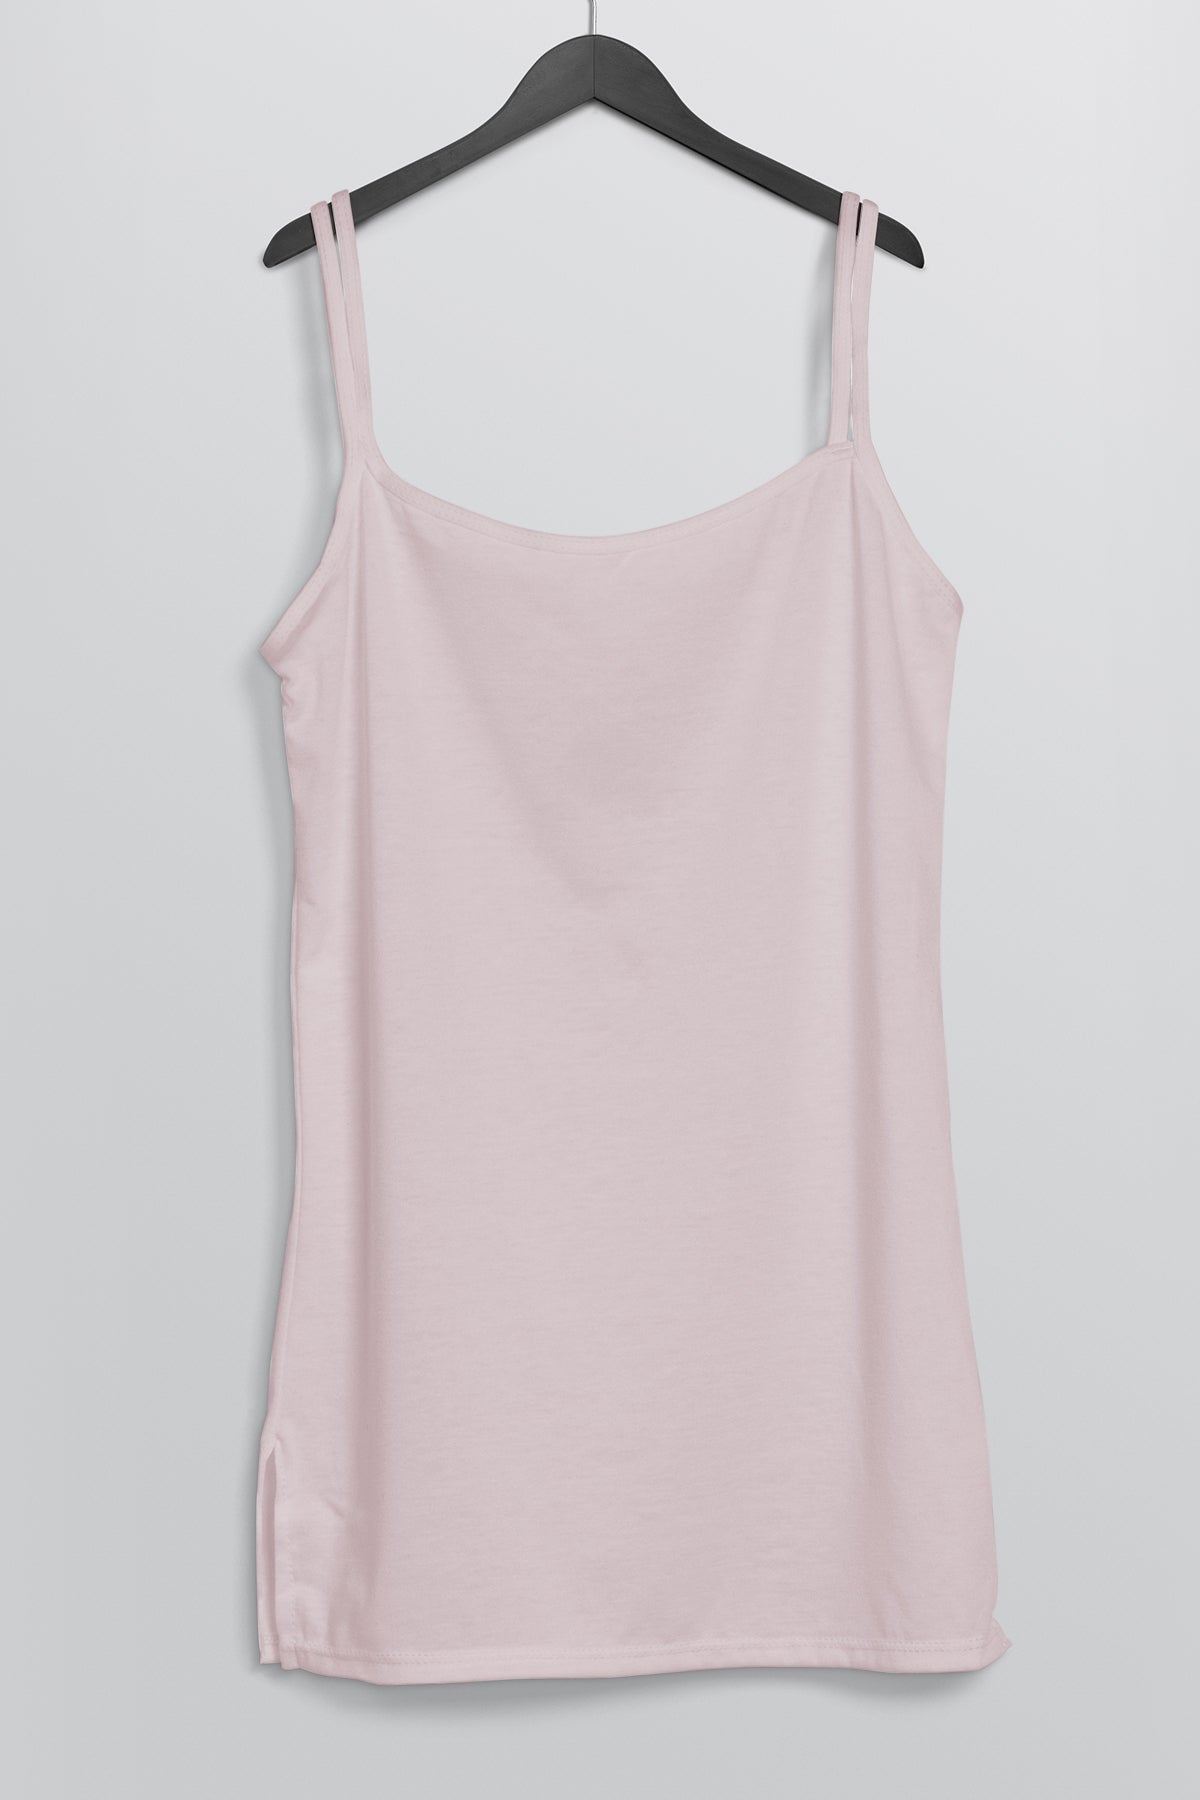 BLS - Colleen Stretchable Cotton Camisole - Pink – Makeup City Pakistan